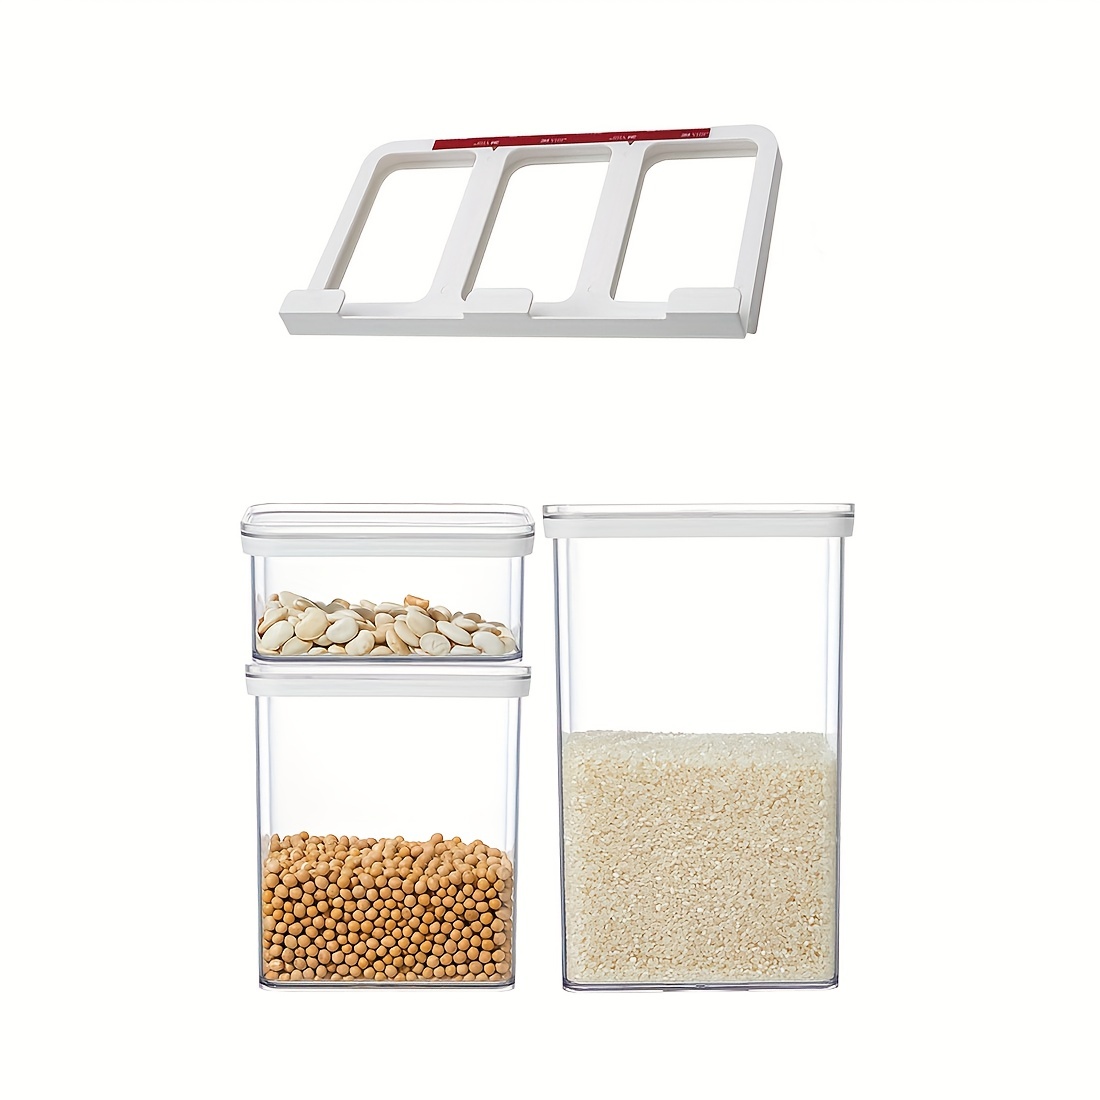 Hanging Sealed Food Storage Container  Kitchen Cabinet Organizer Containers  - Food - Aliexpress